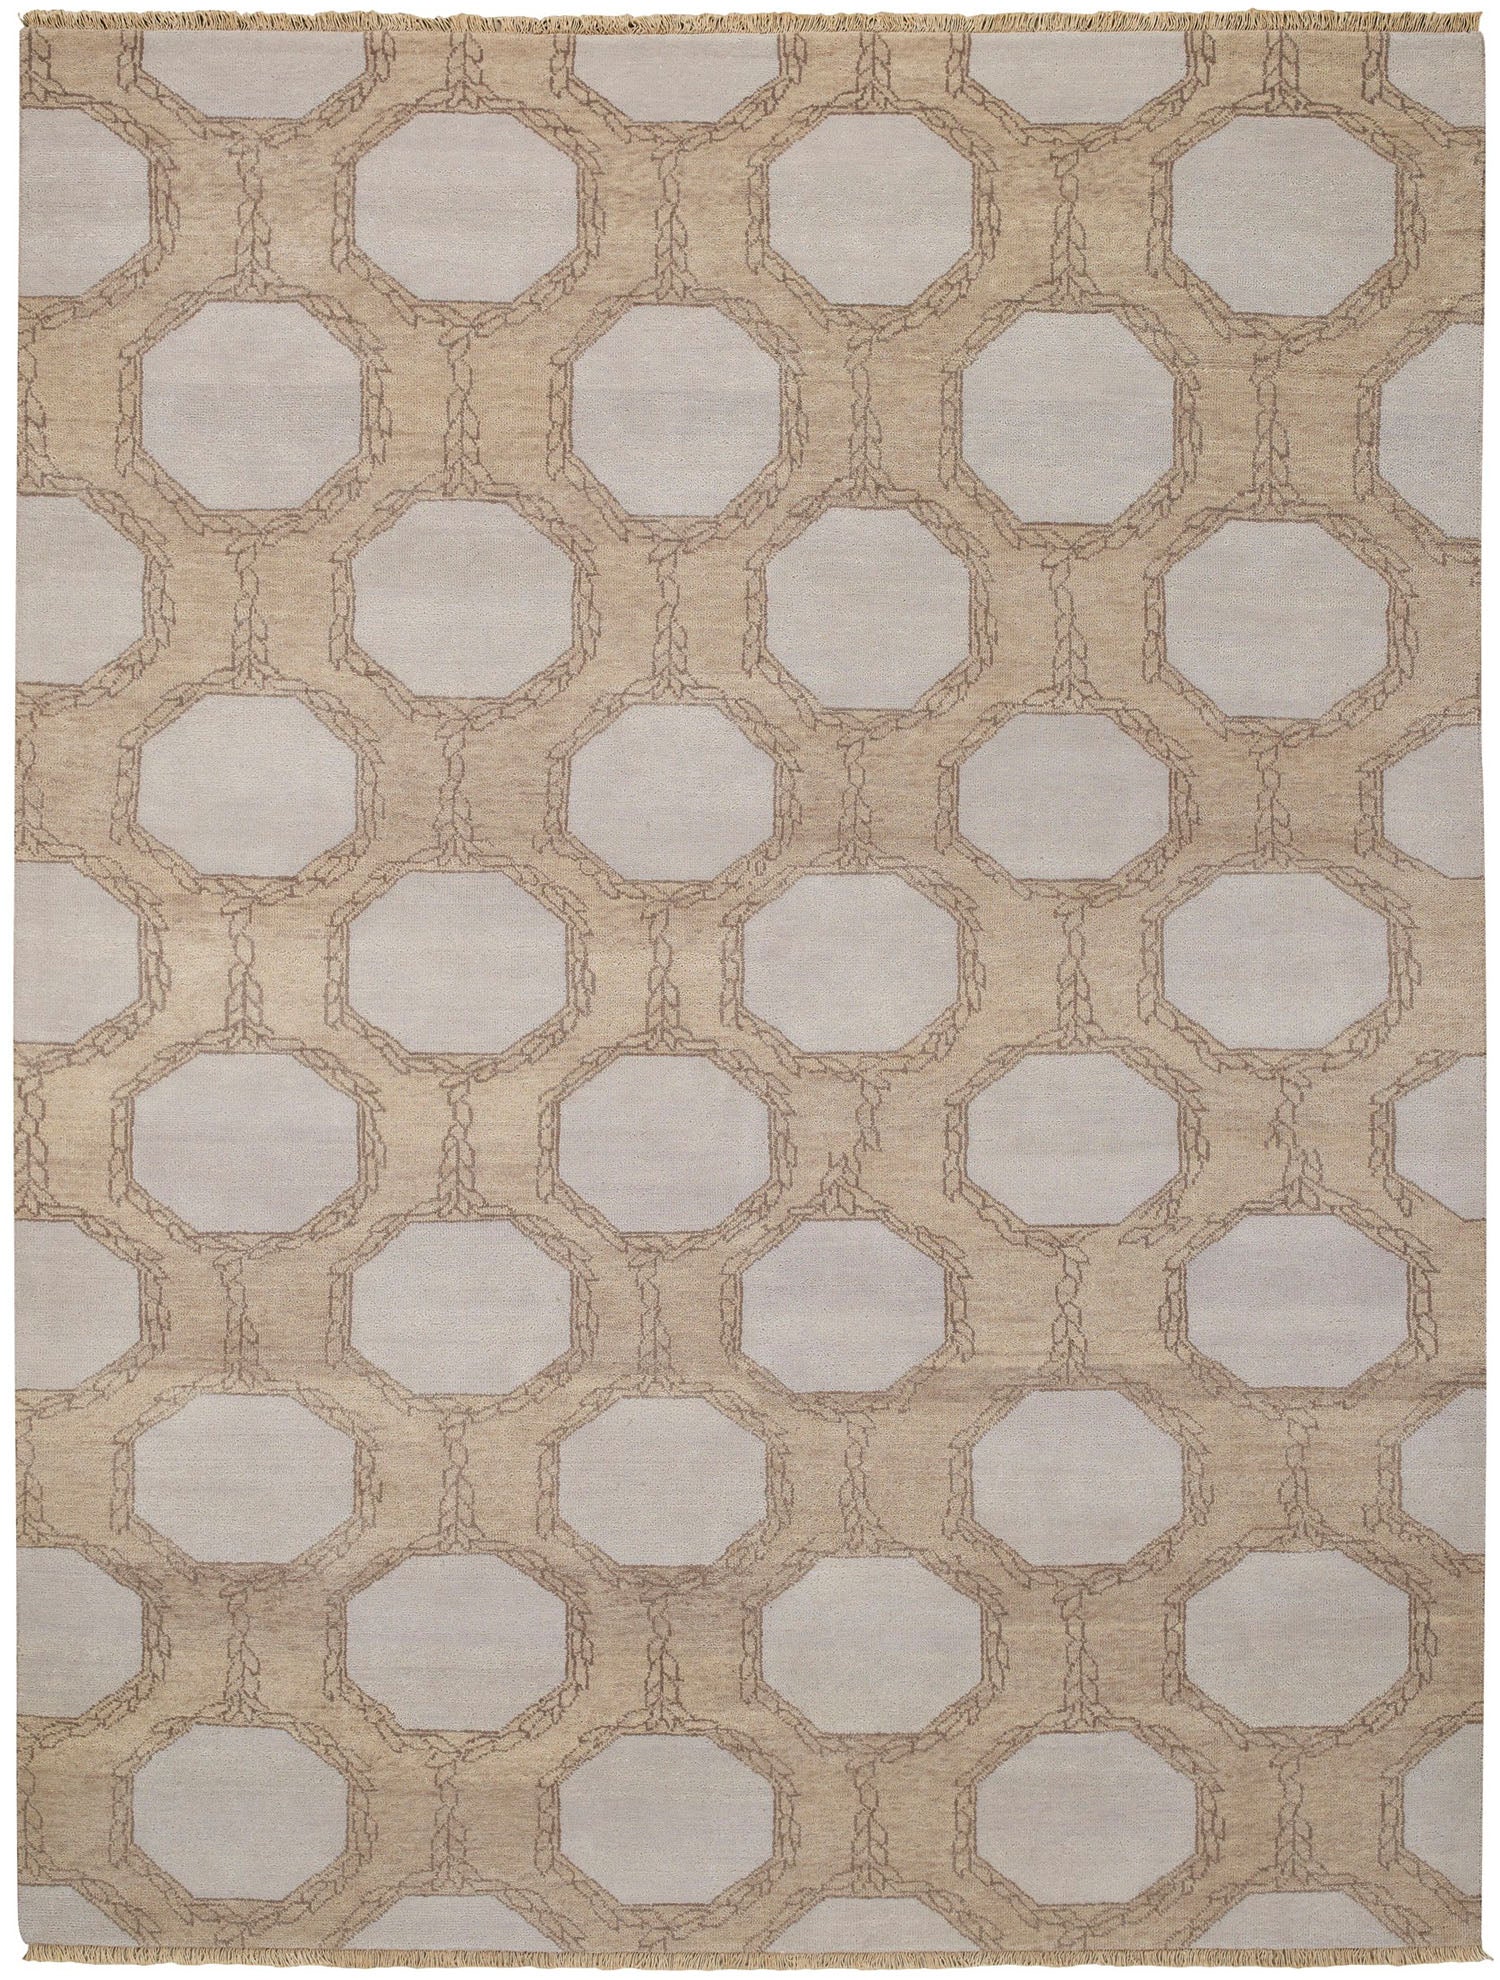 Capel Penny 1077 Tan 675 Area Rug by Hable Construction main image